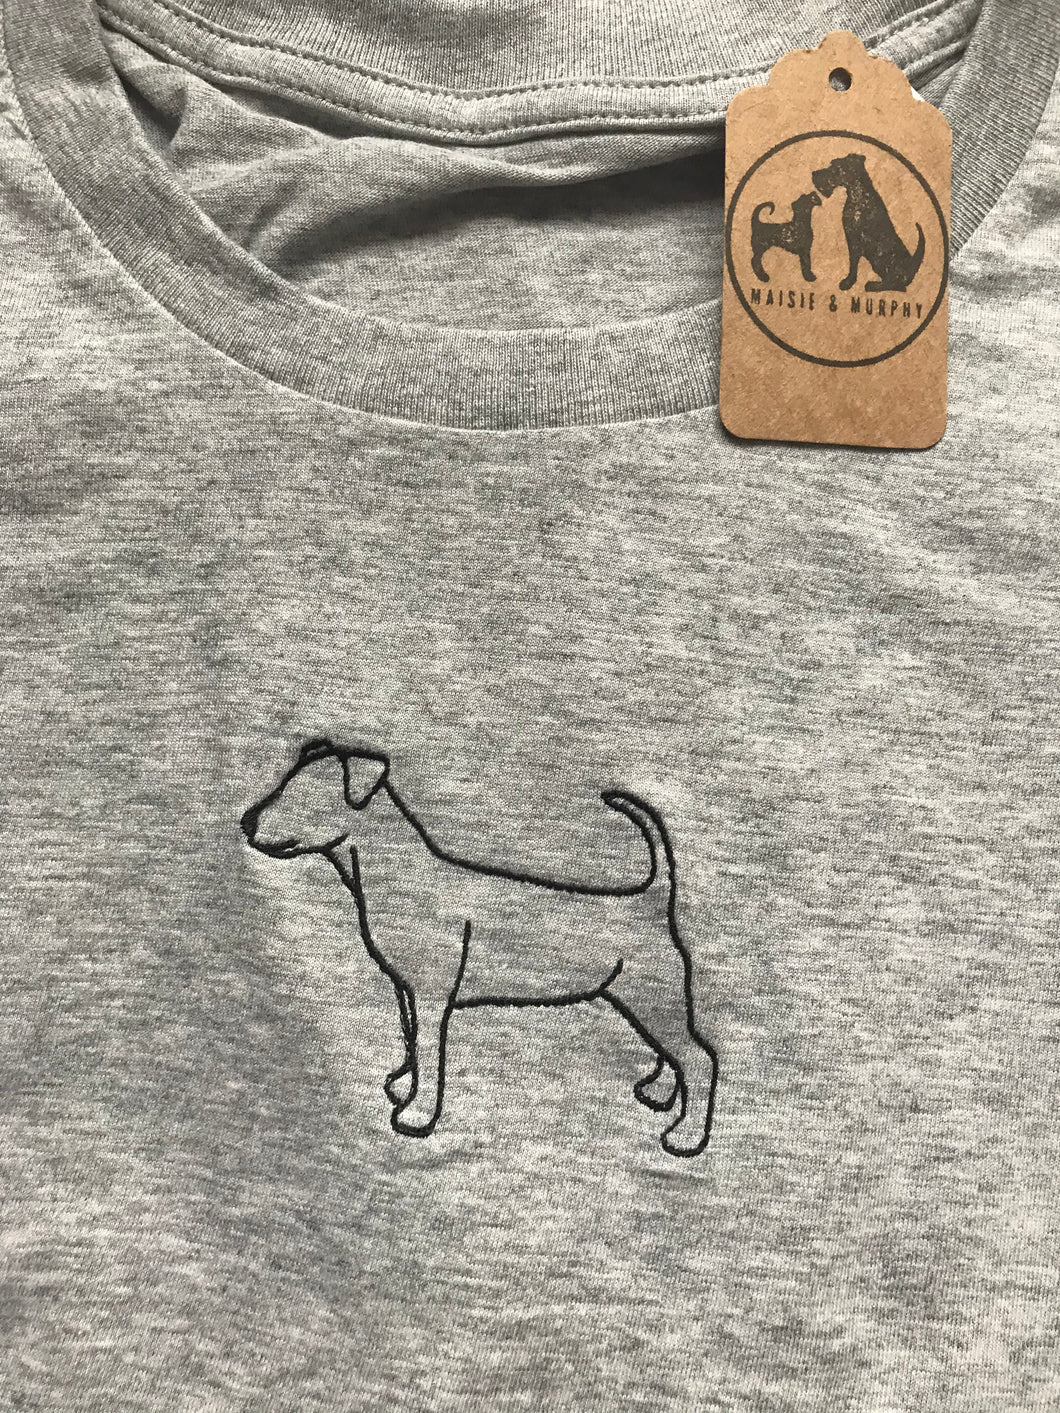 Embroidered Jack Russell Silhouette Sweatshirt- Gifts for Terrier lovers and owners